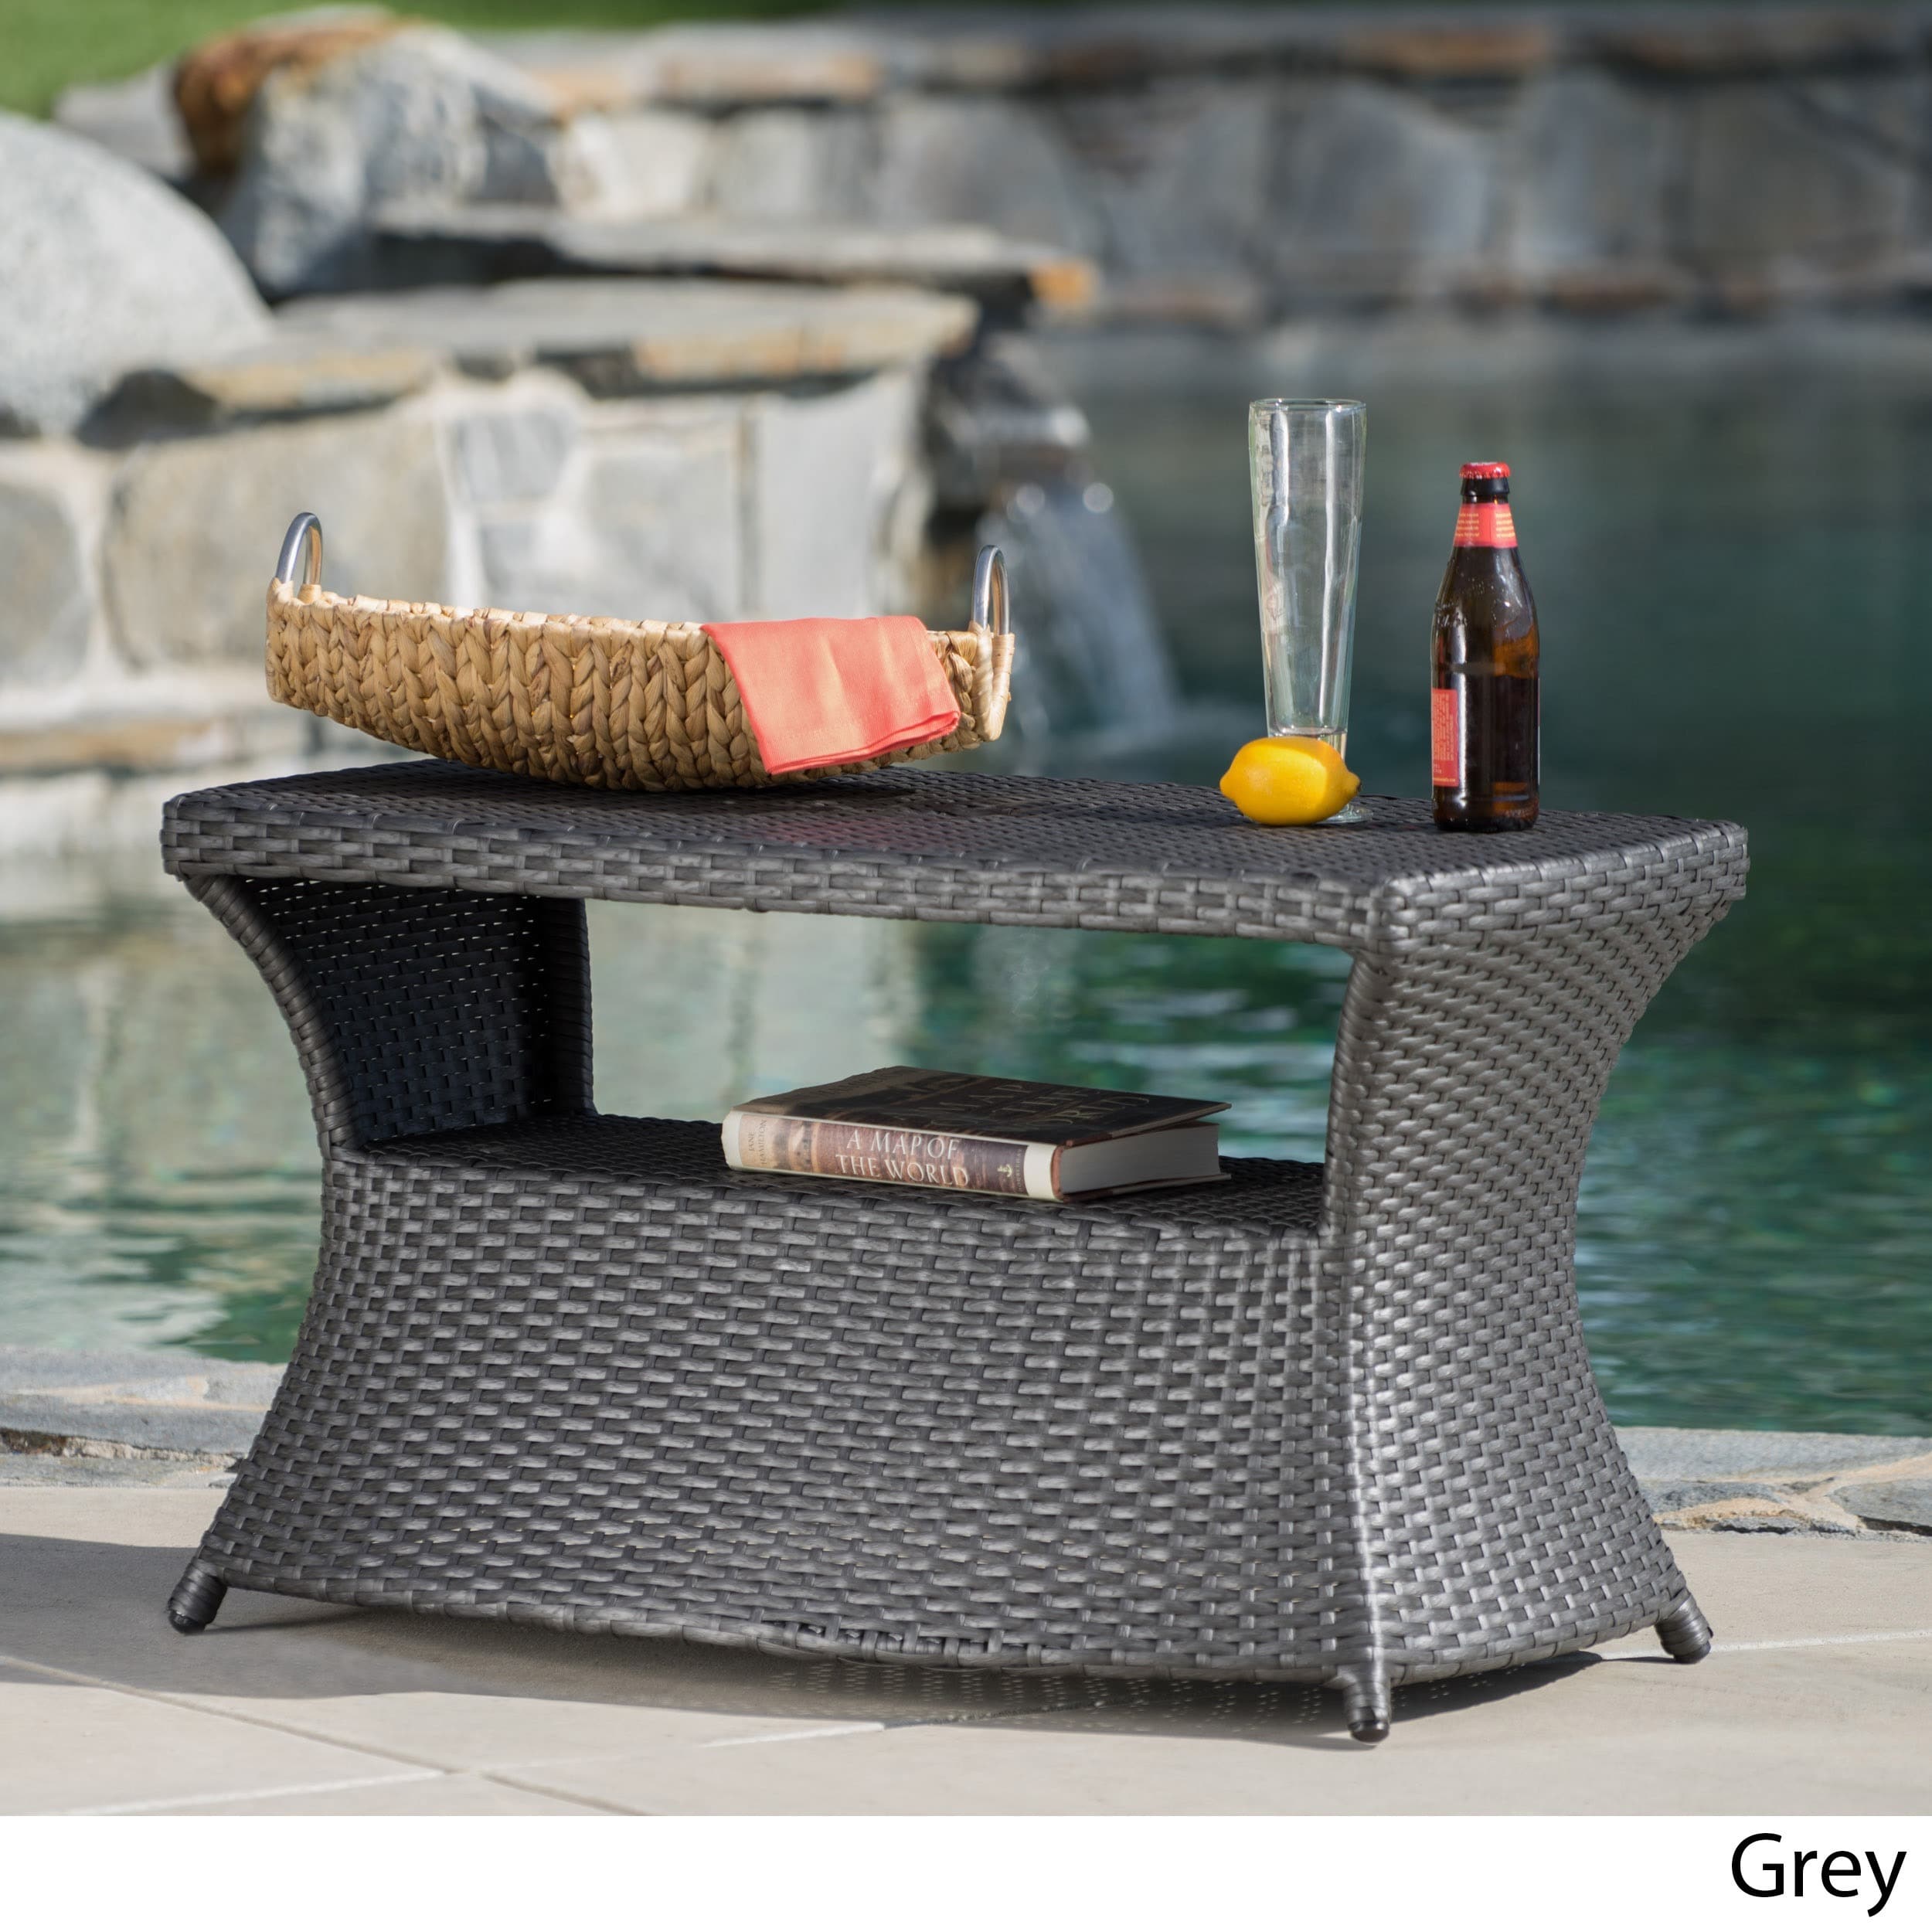 berkeley outdoor wicker side table with umbrella hole christopher knight home free shipping today hairpin leg desk tennis robot glass coffee storage sewing hampton furniture